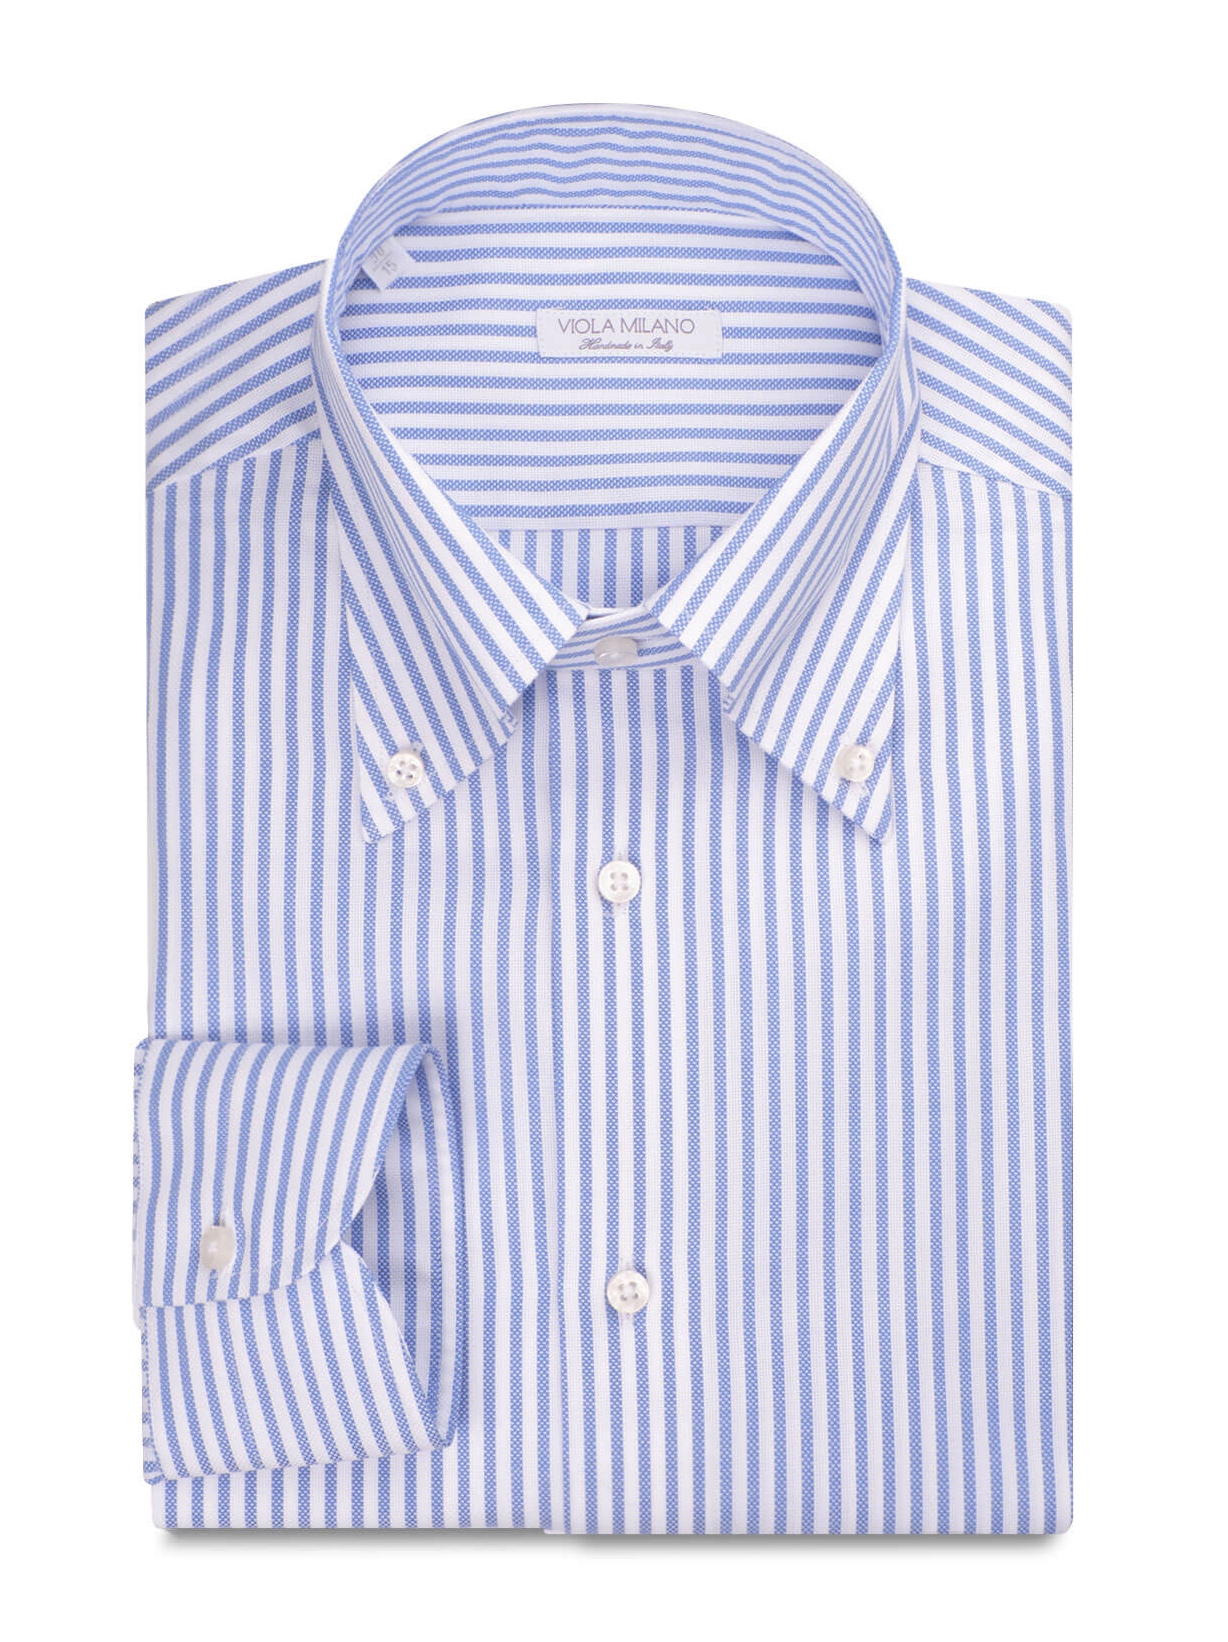 Light Blue Striped Shirt - Made in Italy